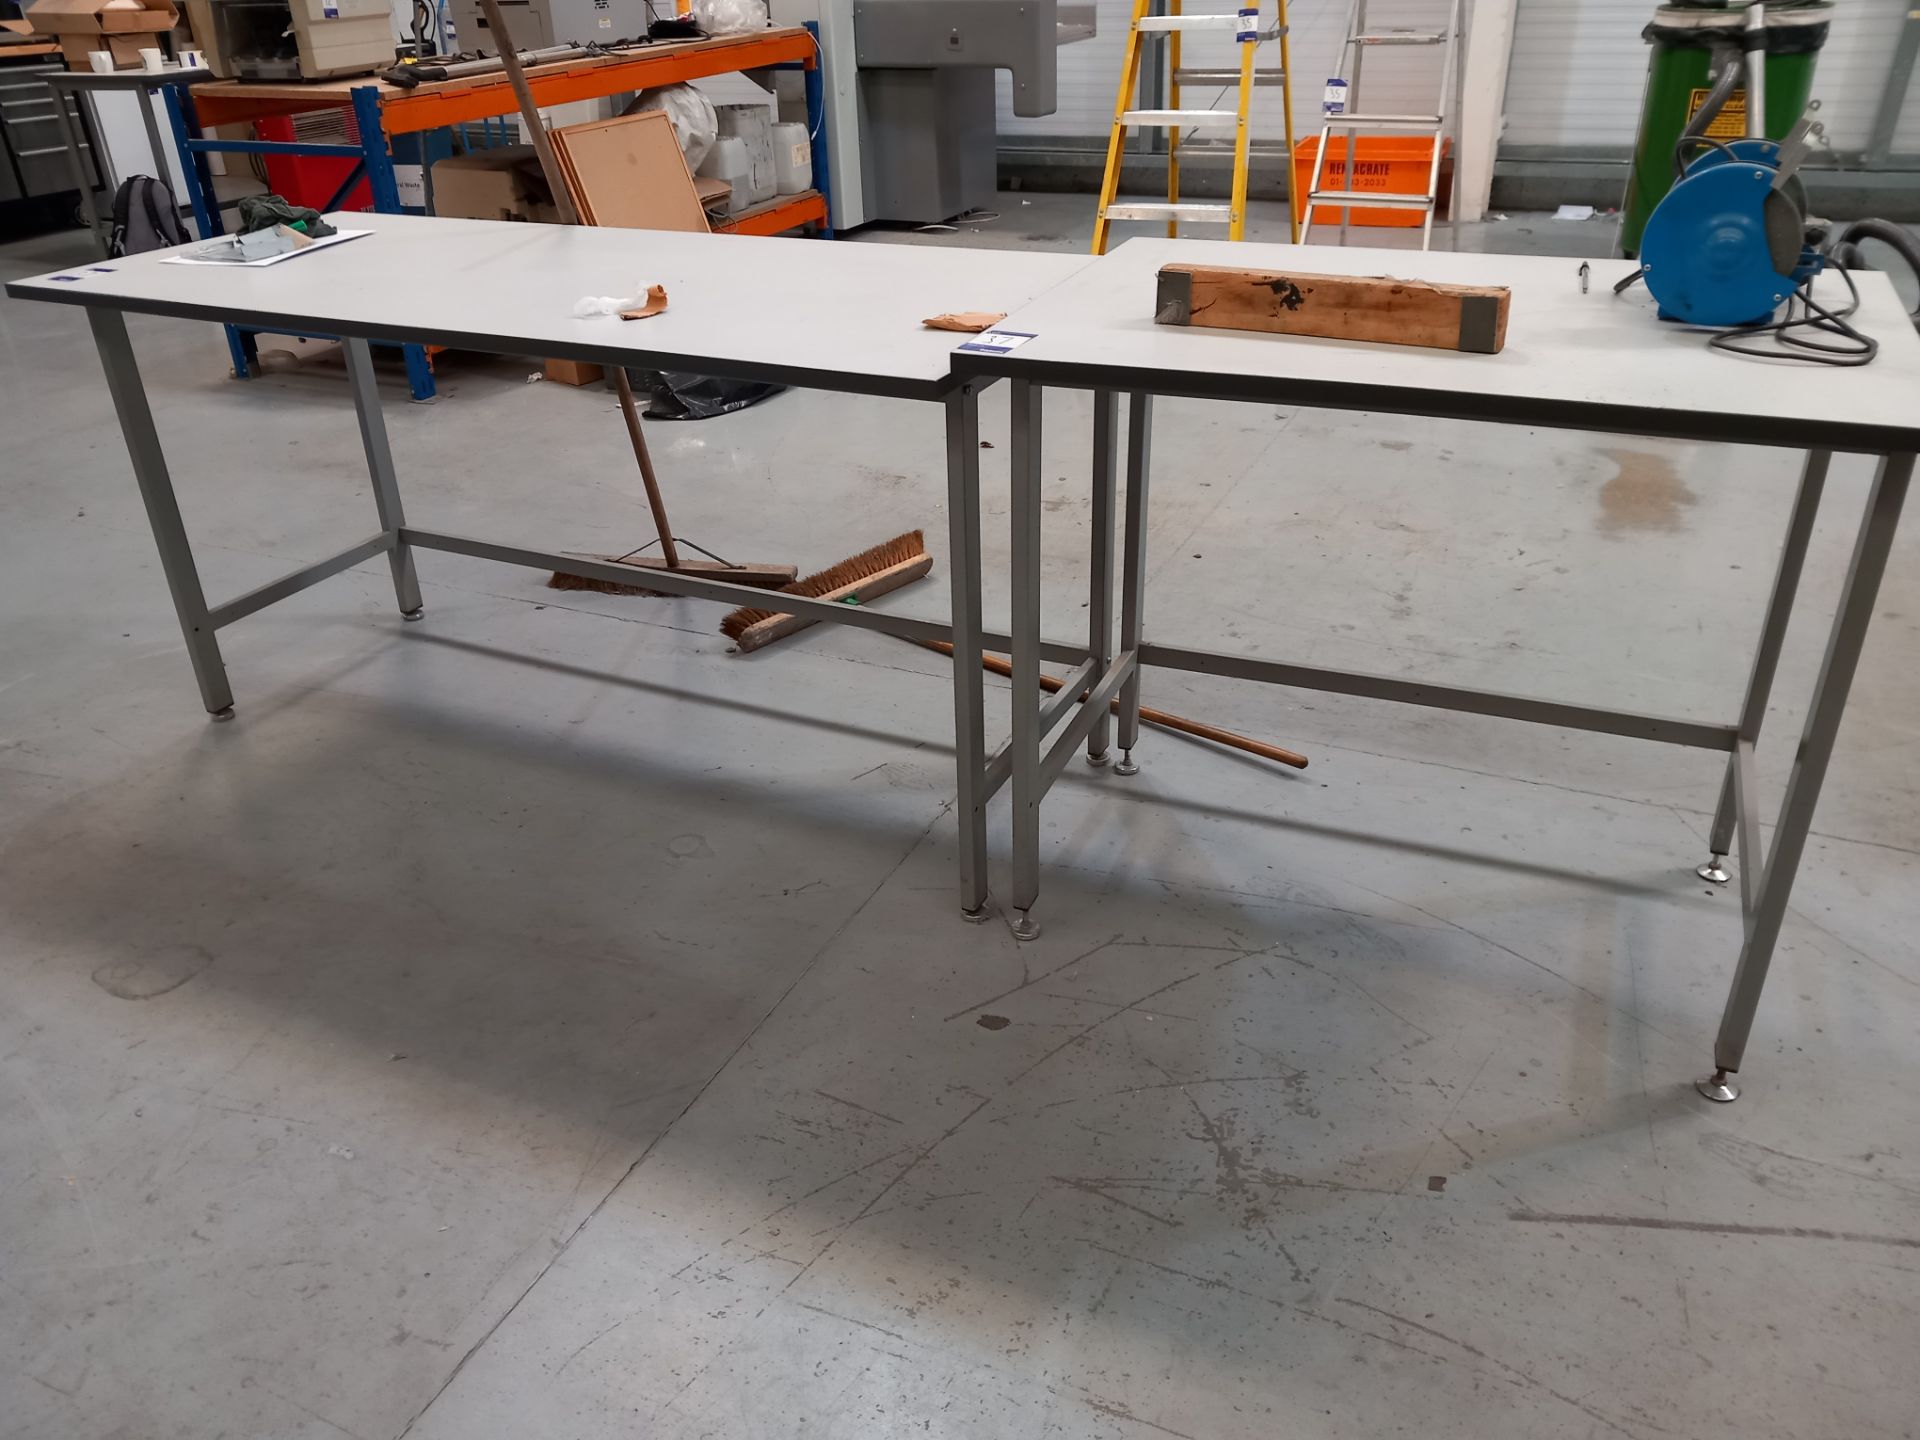 Two steel framed packing tables